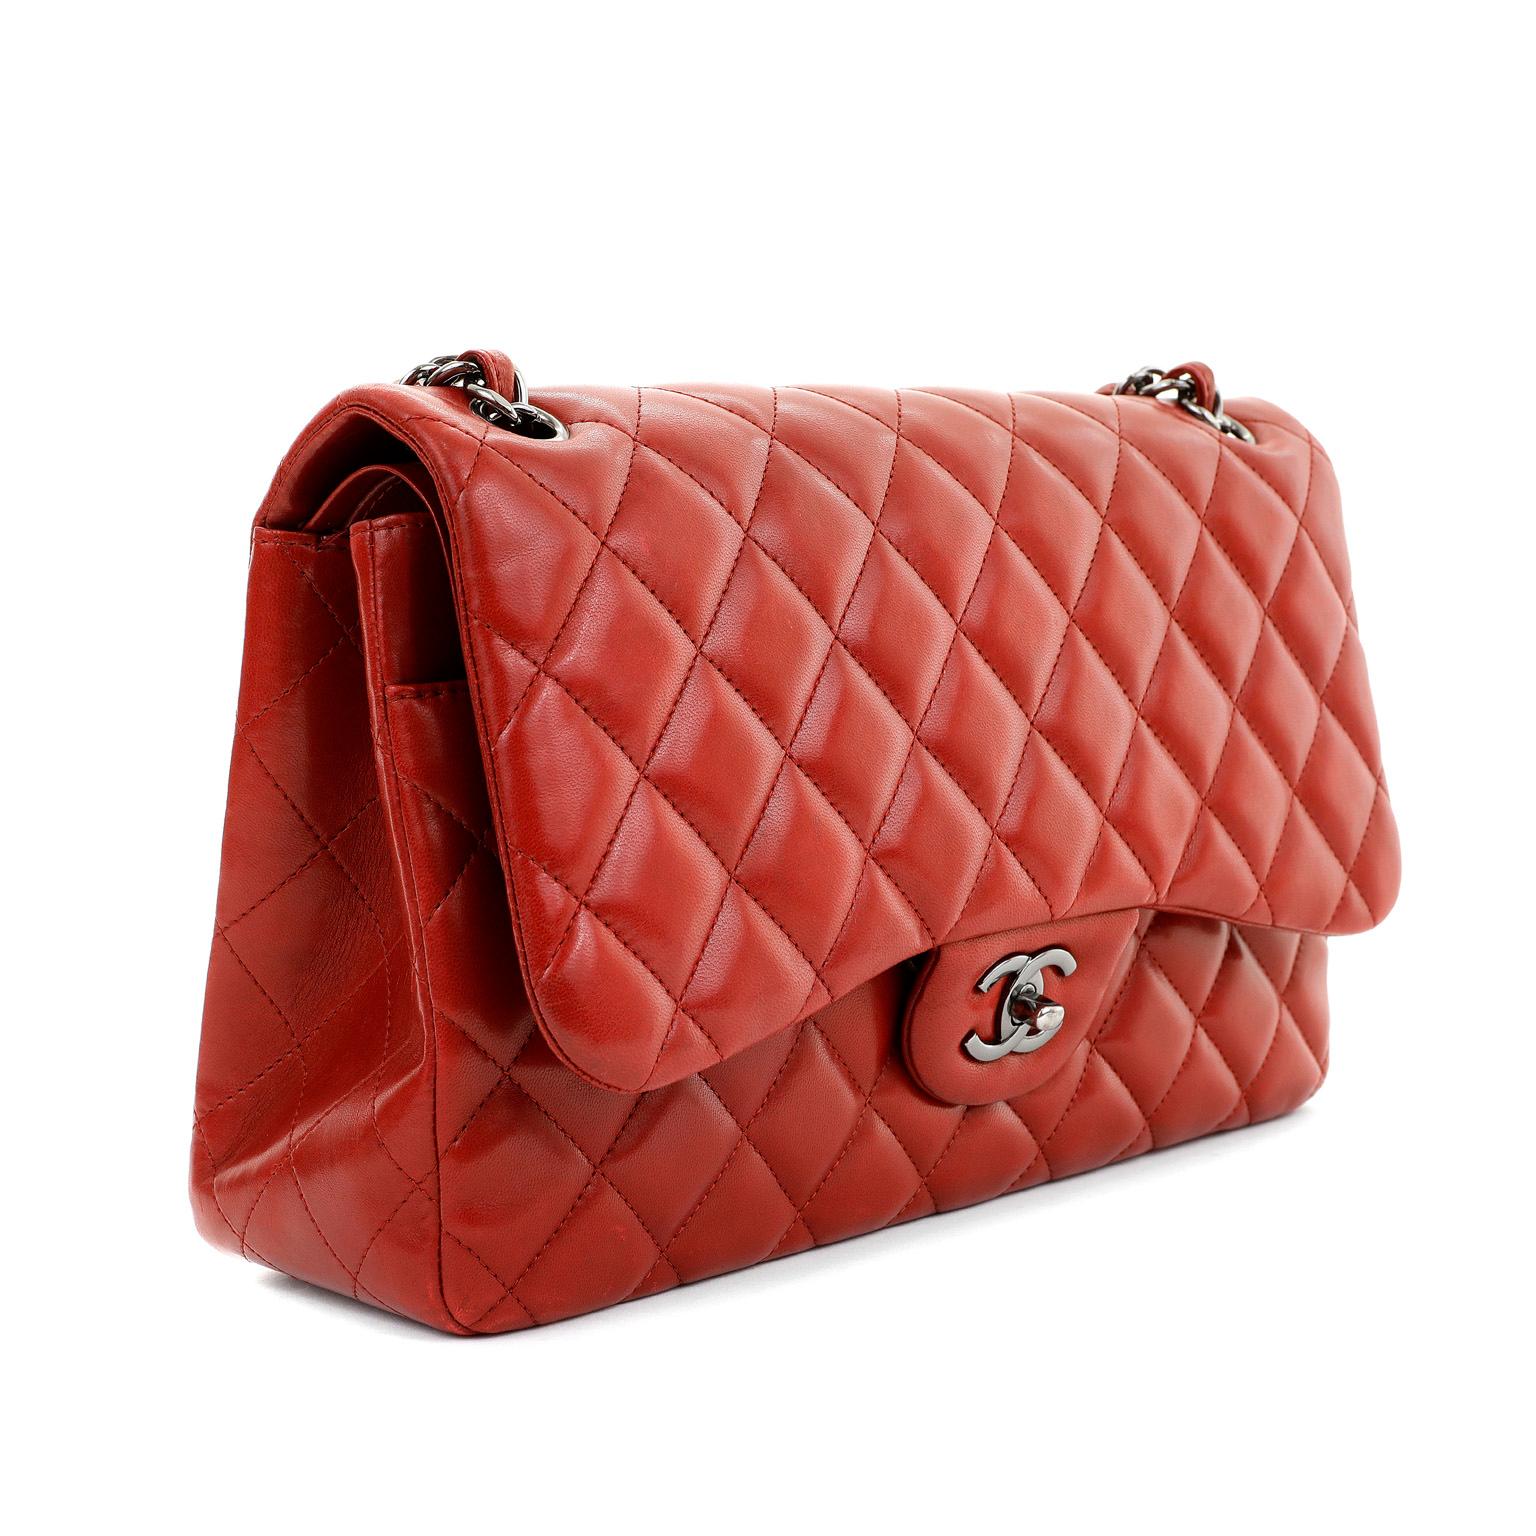 Chanel Lipstick Red Lambskin Jumbo Classic Flap  In Excellent Condition For Sale In Palm Beach, FL